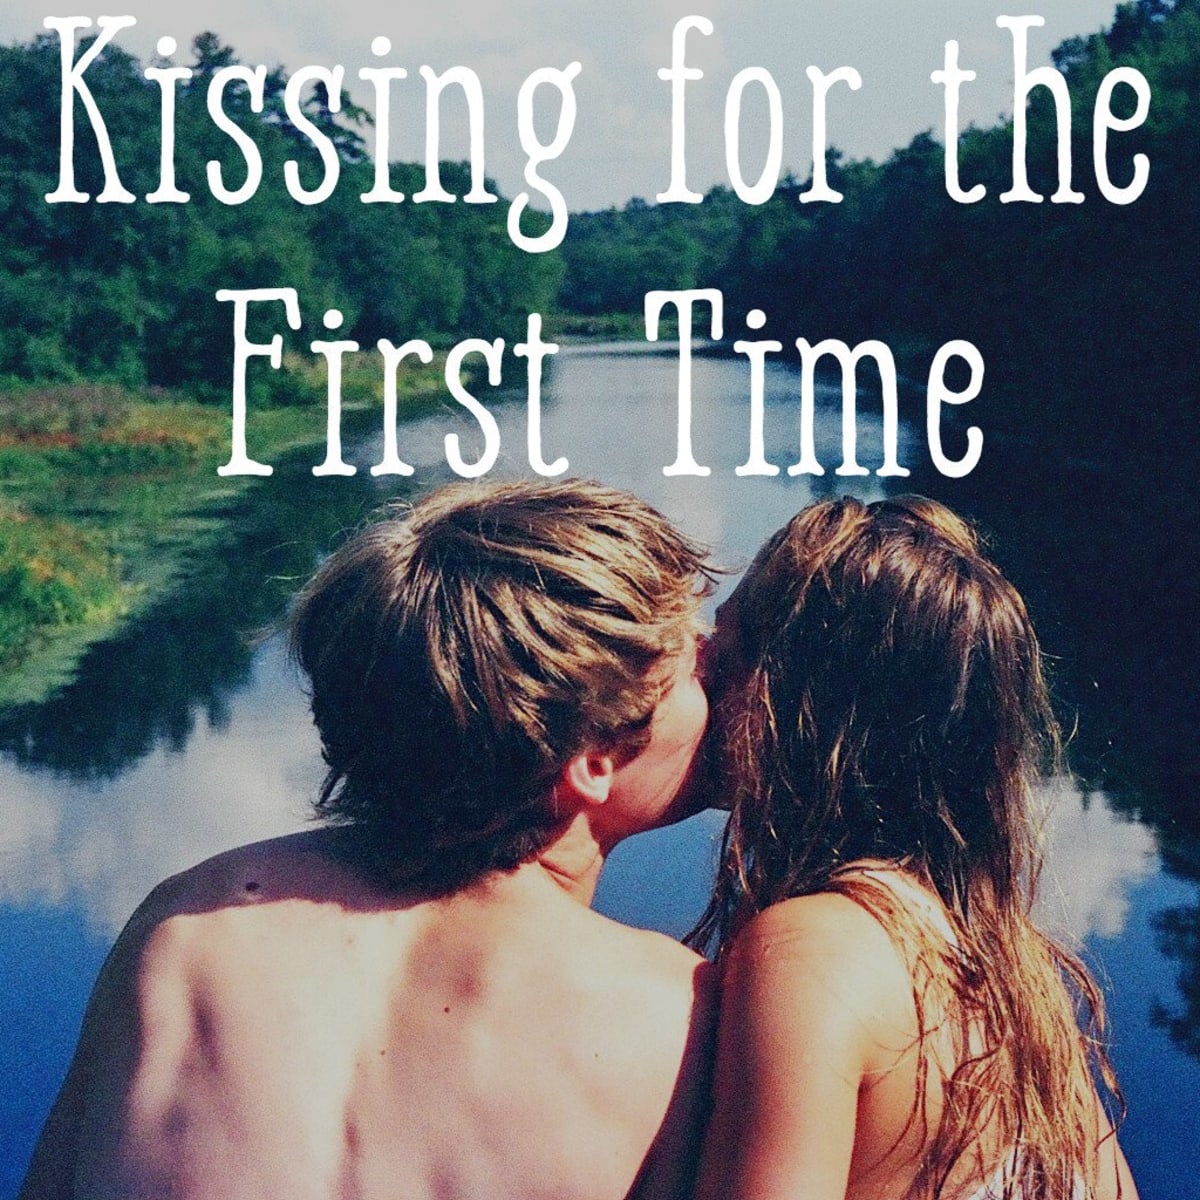 How To Kiss Someone For The First Time Pairedlife Relationships Of moments when you whispered adore me. how to kiss someone for the first time